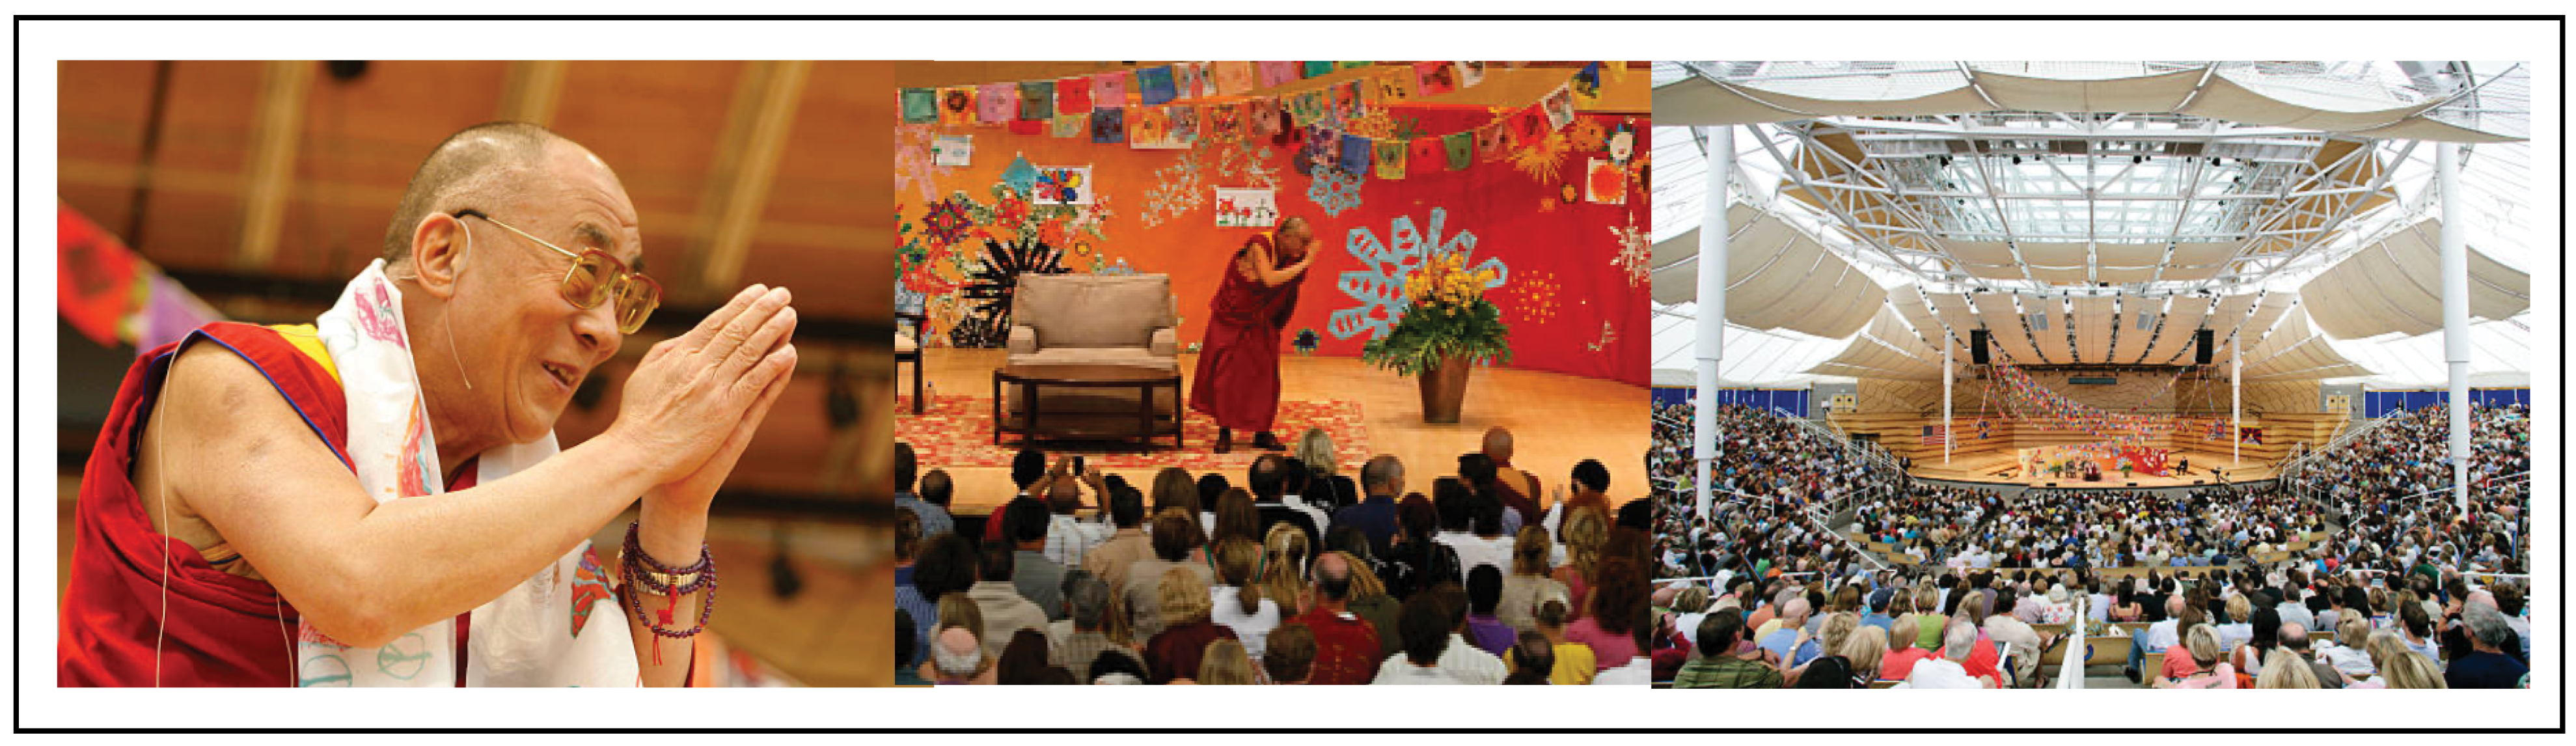 His Holiness the Dalai Lama at Aspen Institute CTAC Conference on Tibetan Culture